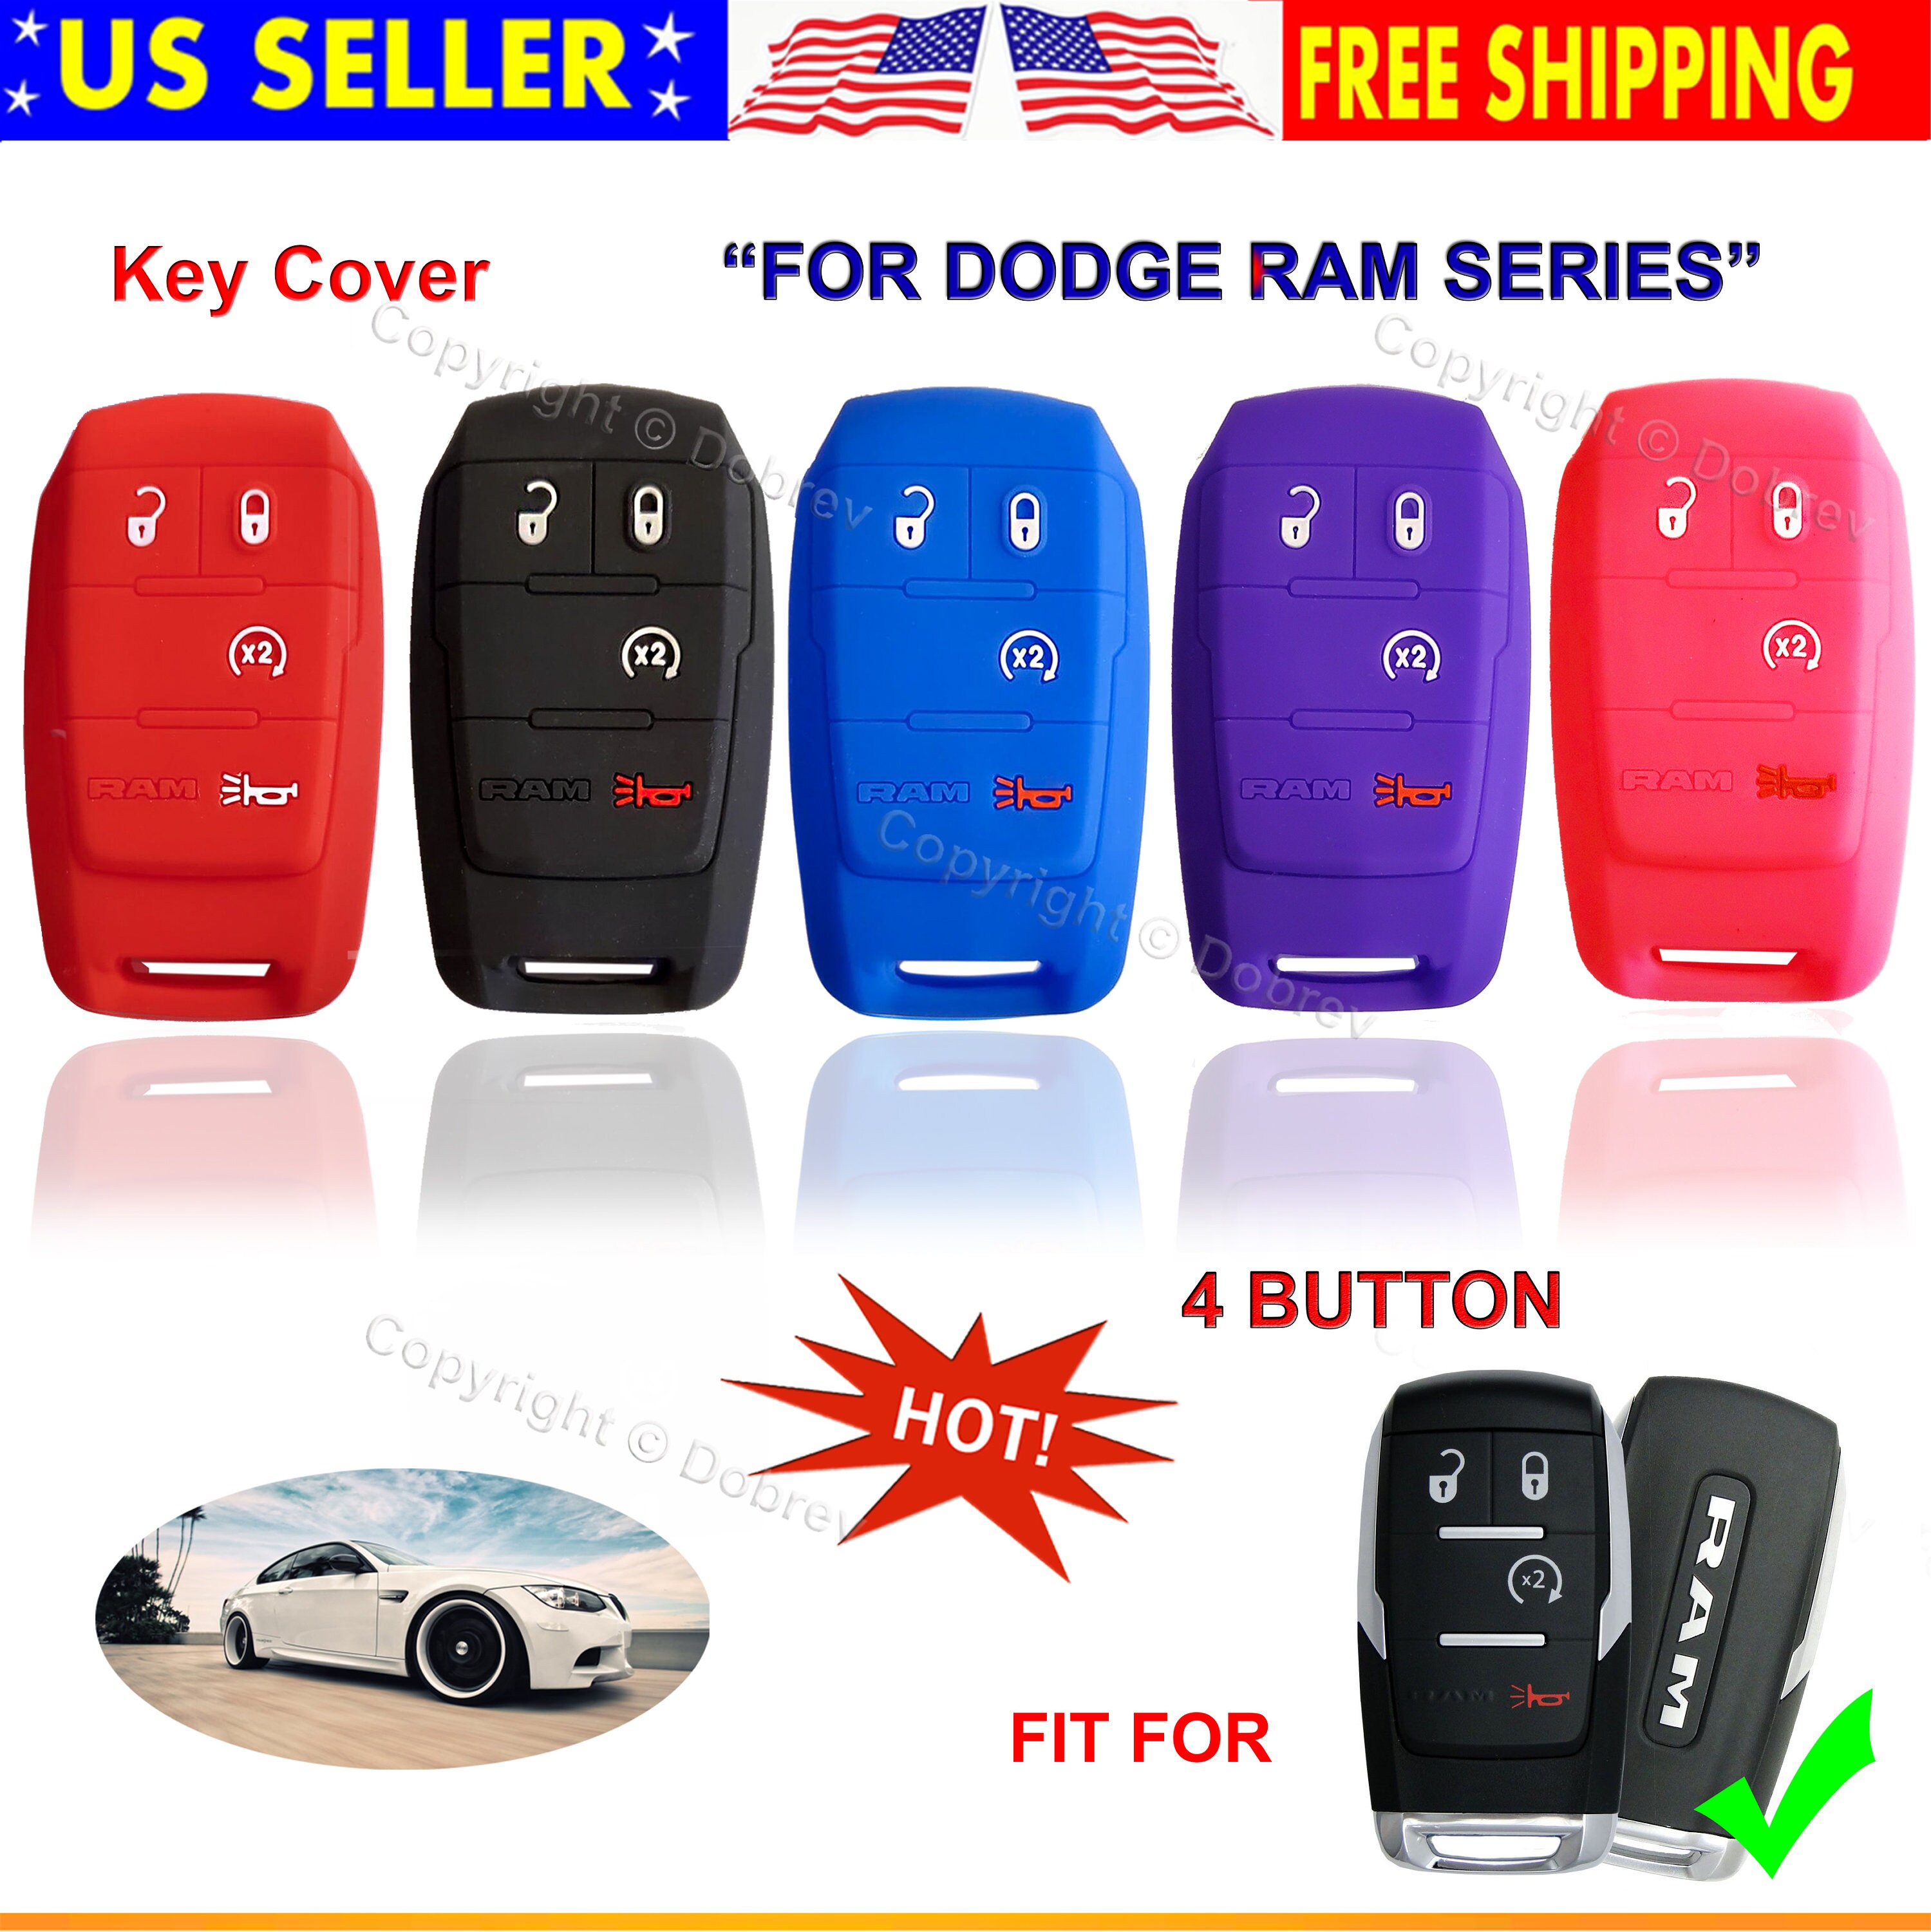 Dobrev 4 Button Silicone Rubber Cover Keyless Entry Fob Case Skin Protector Holder For Dodge Ram Truck 2019 2020 2021 2500 3500 5500 Key